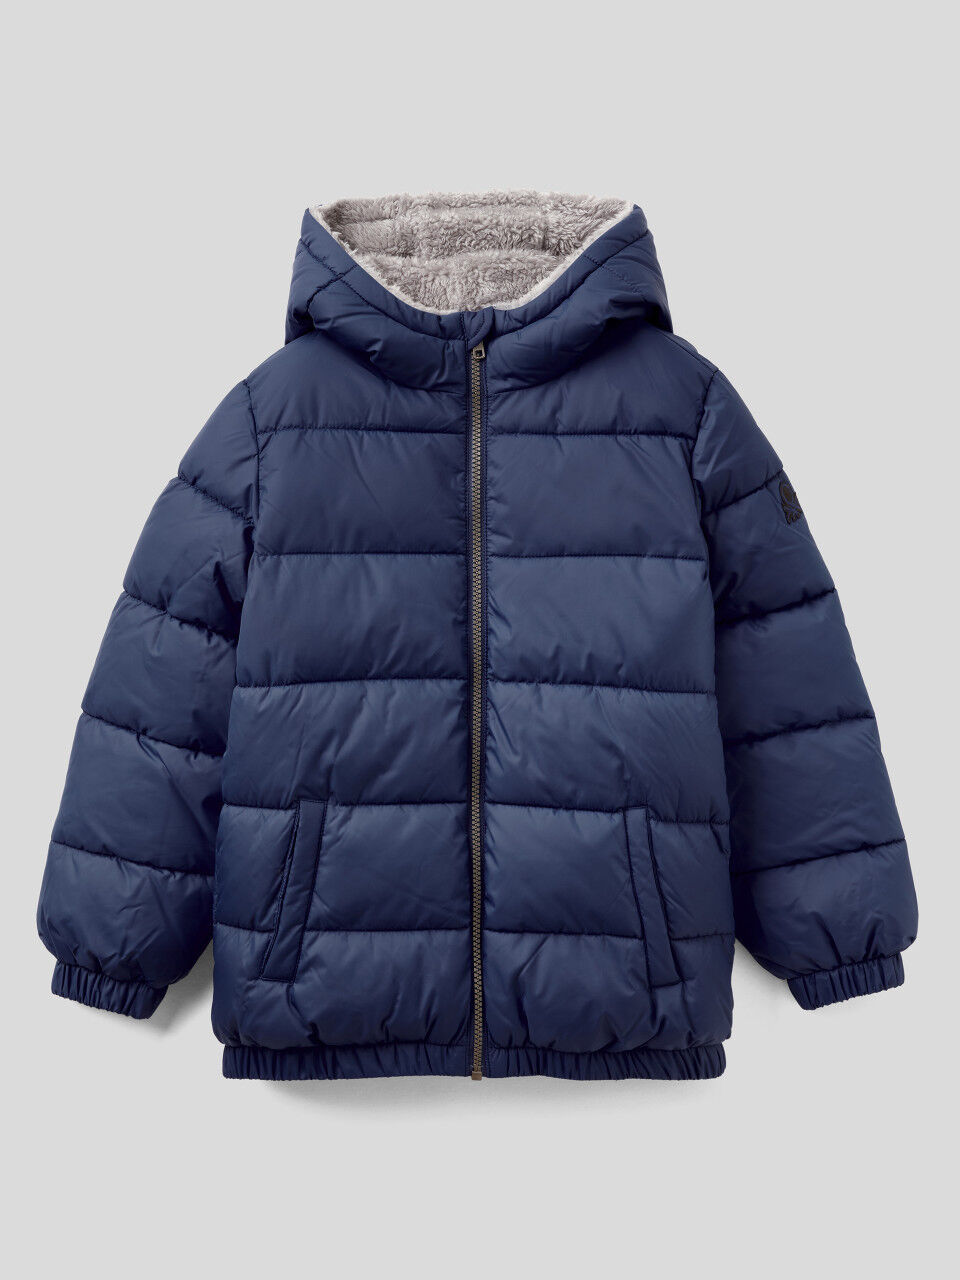 Padded jacket with teddy interior